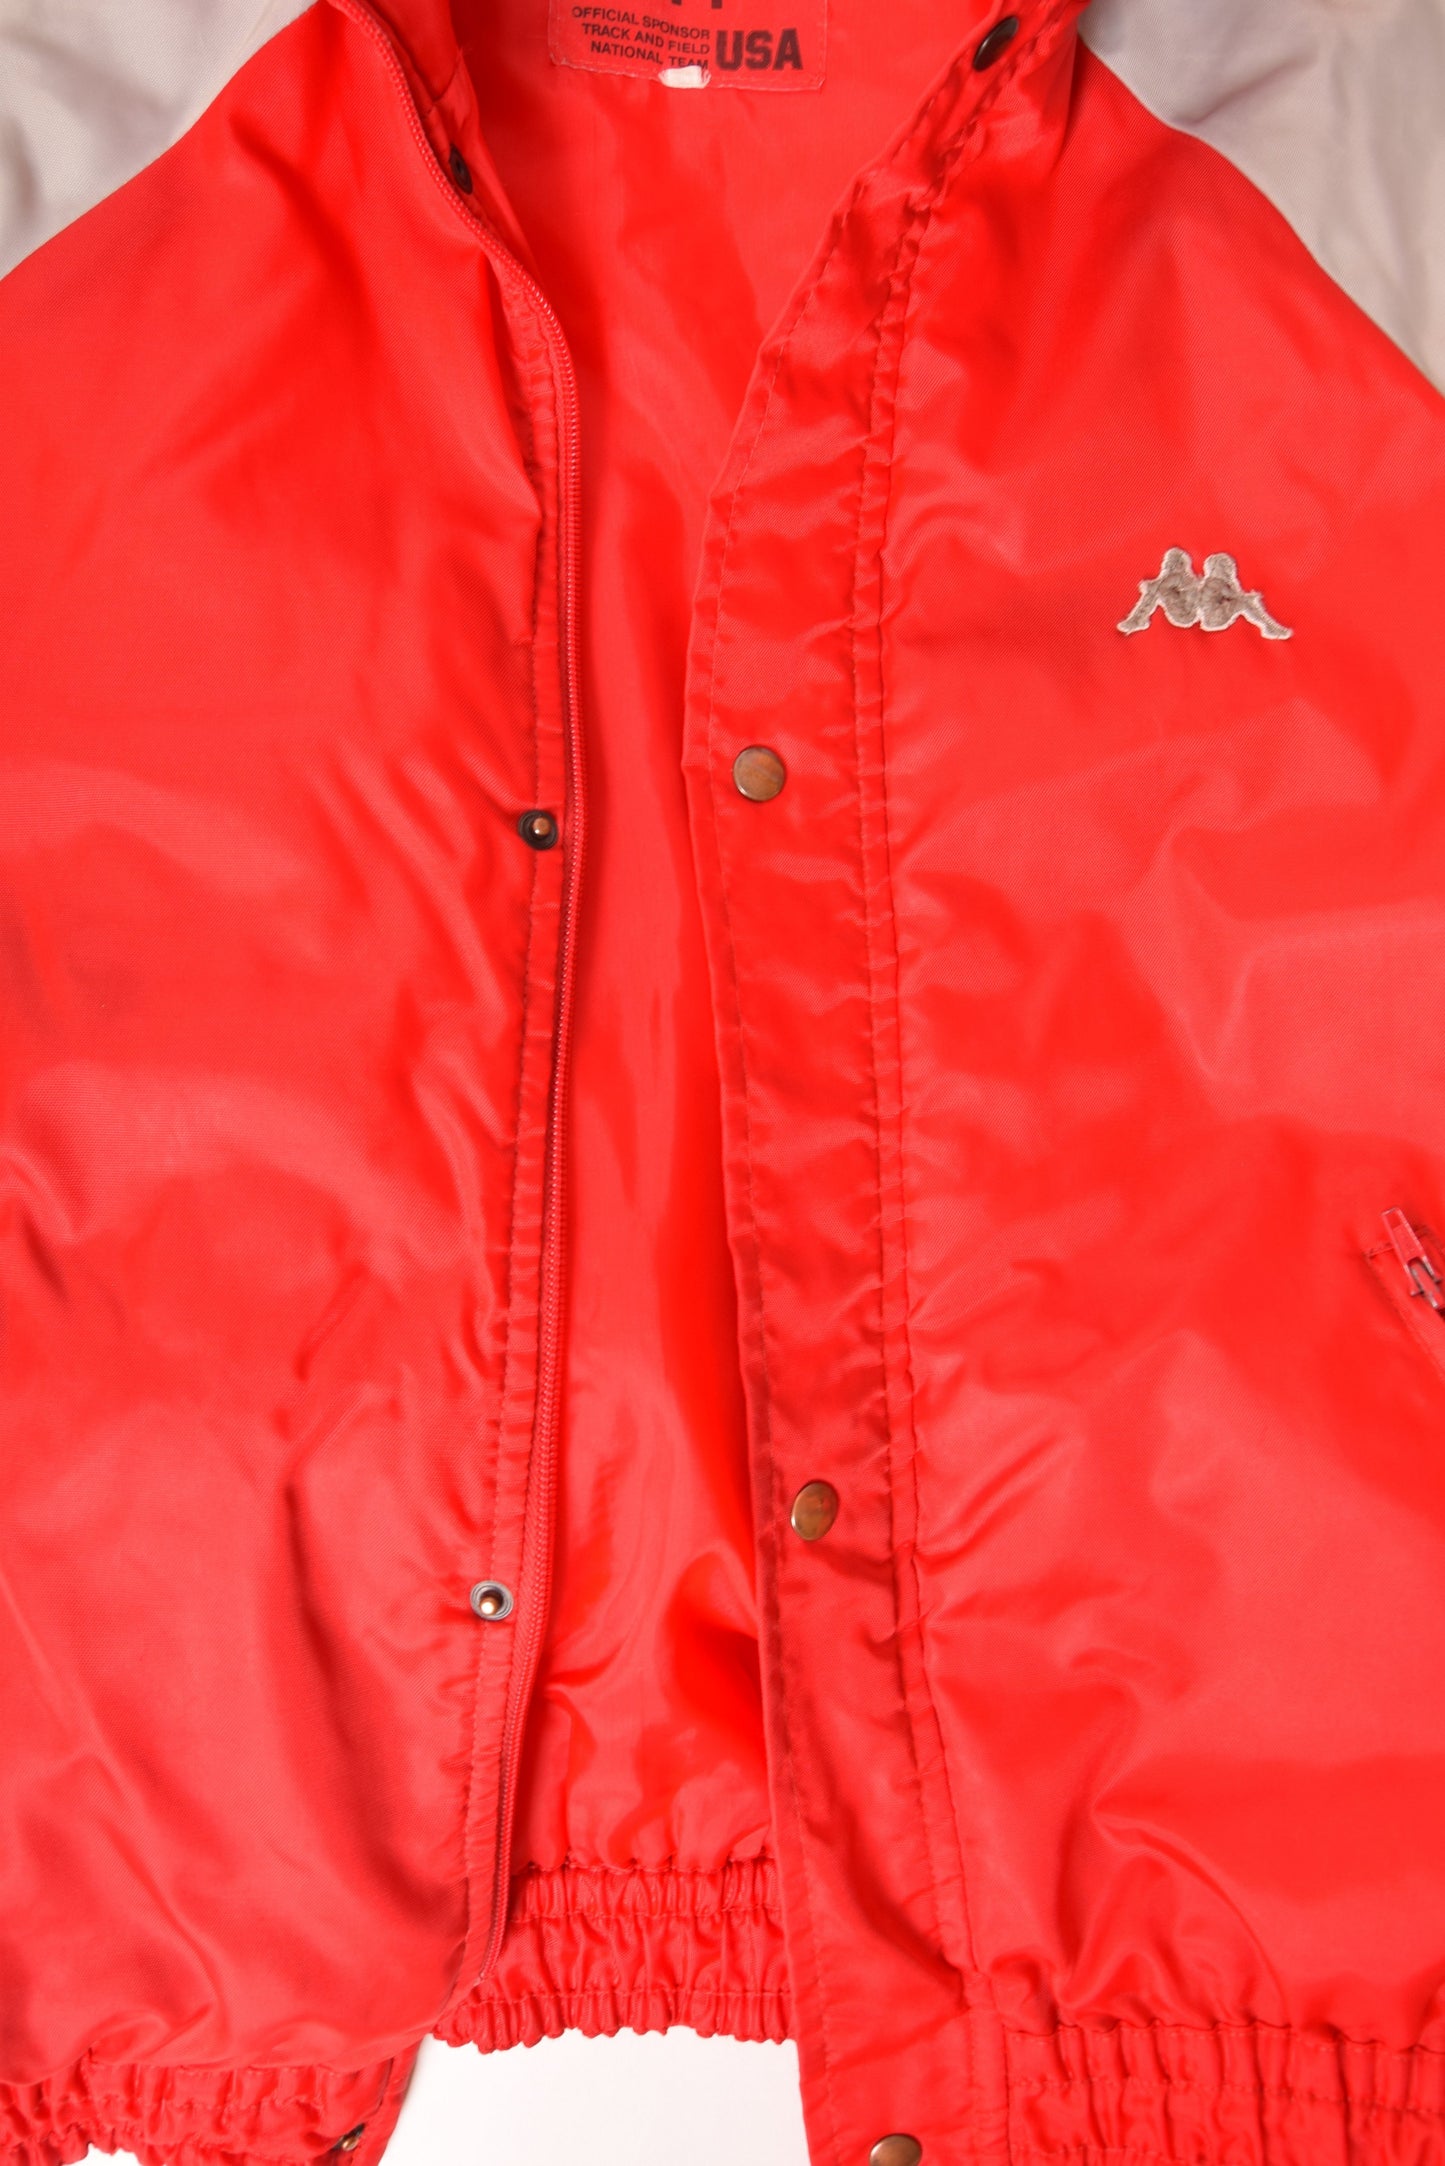 Vintage 80's Kappa Jacket Made in Italy Red Grey 